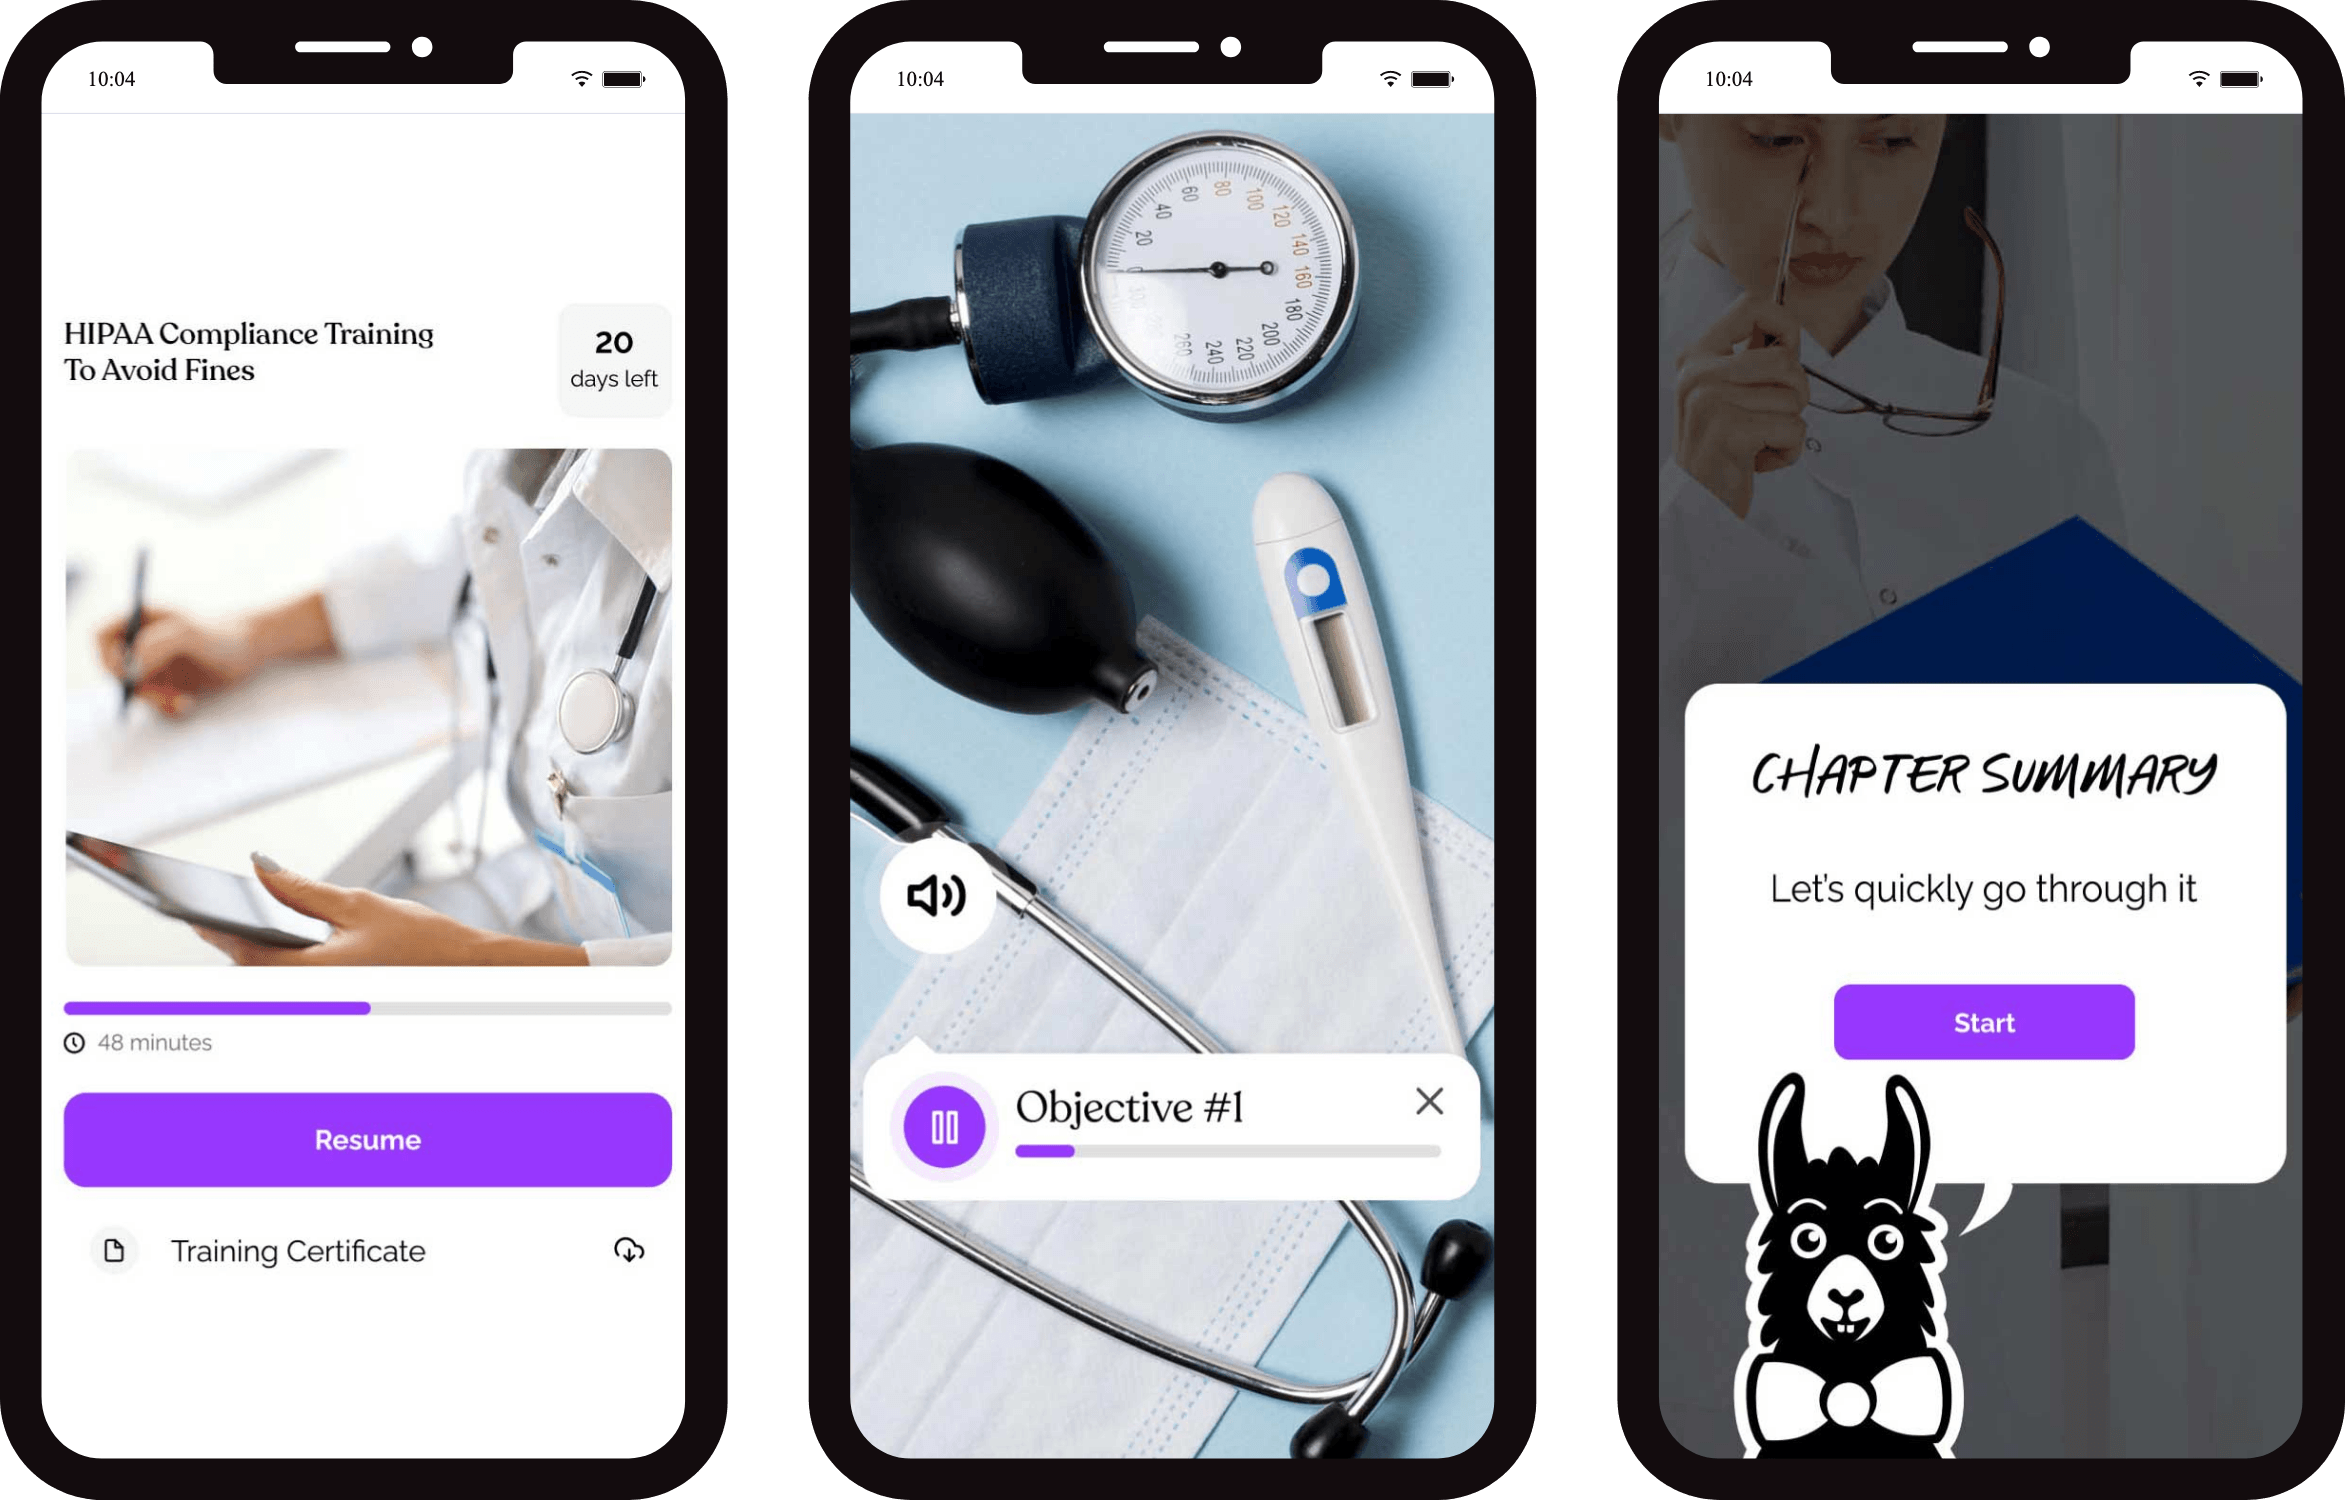 Mobile-friendly for healthcare professionals on-the-go